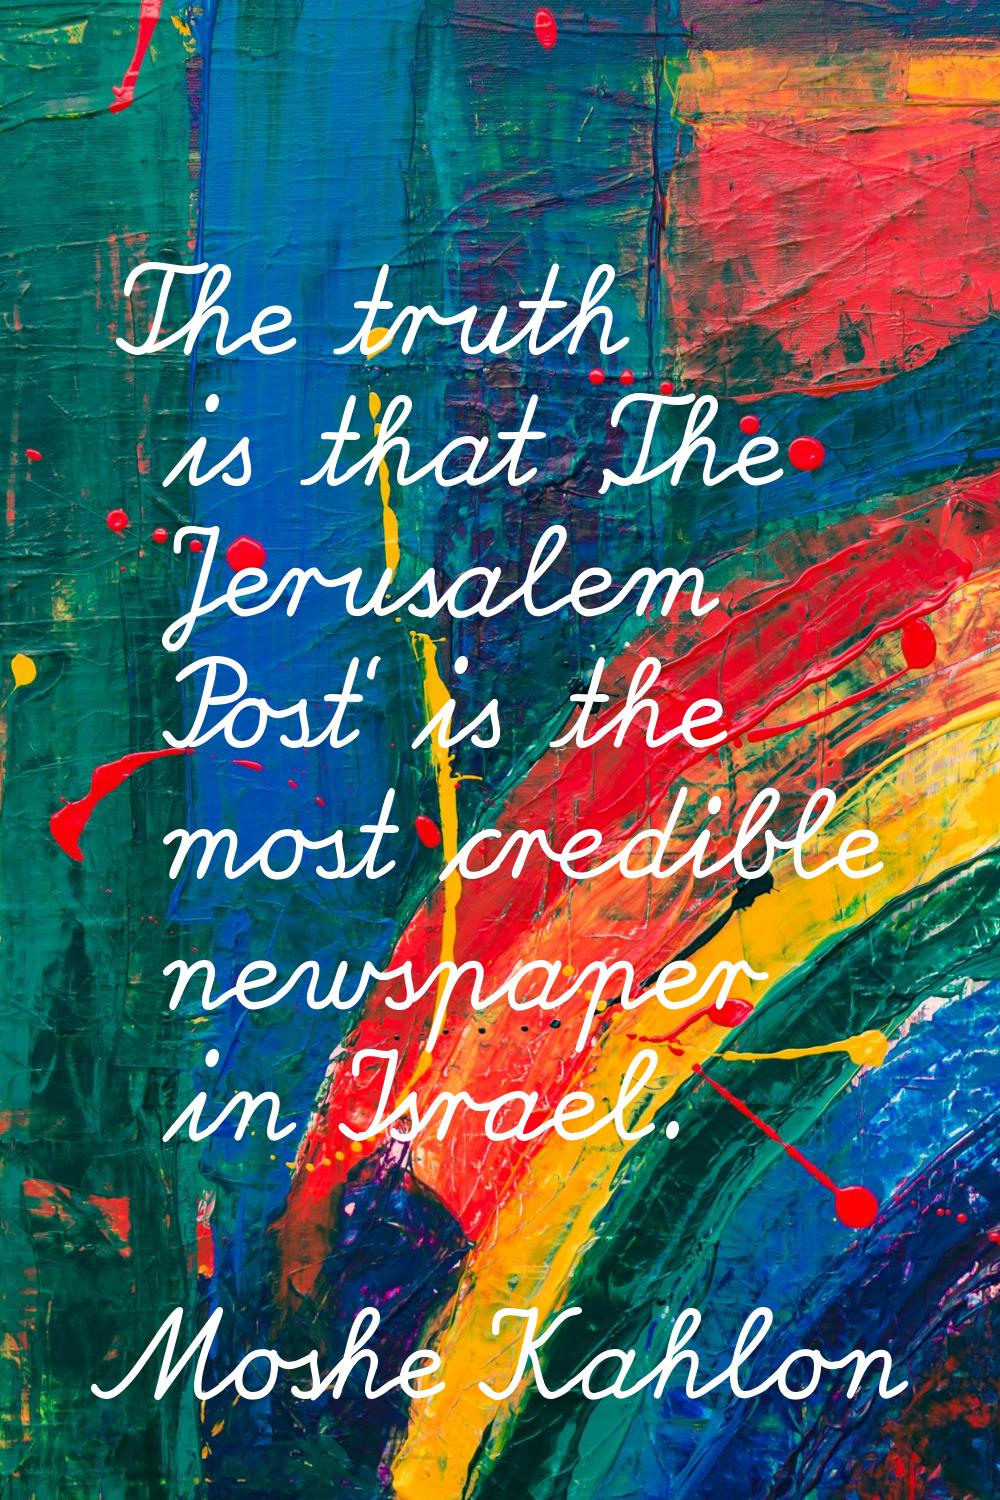 The truth is that 'The Jerusalem Post' is the most credible newspaper in Israel.